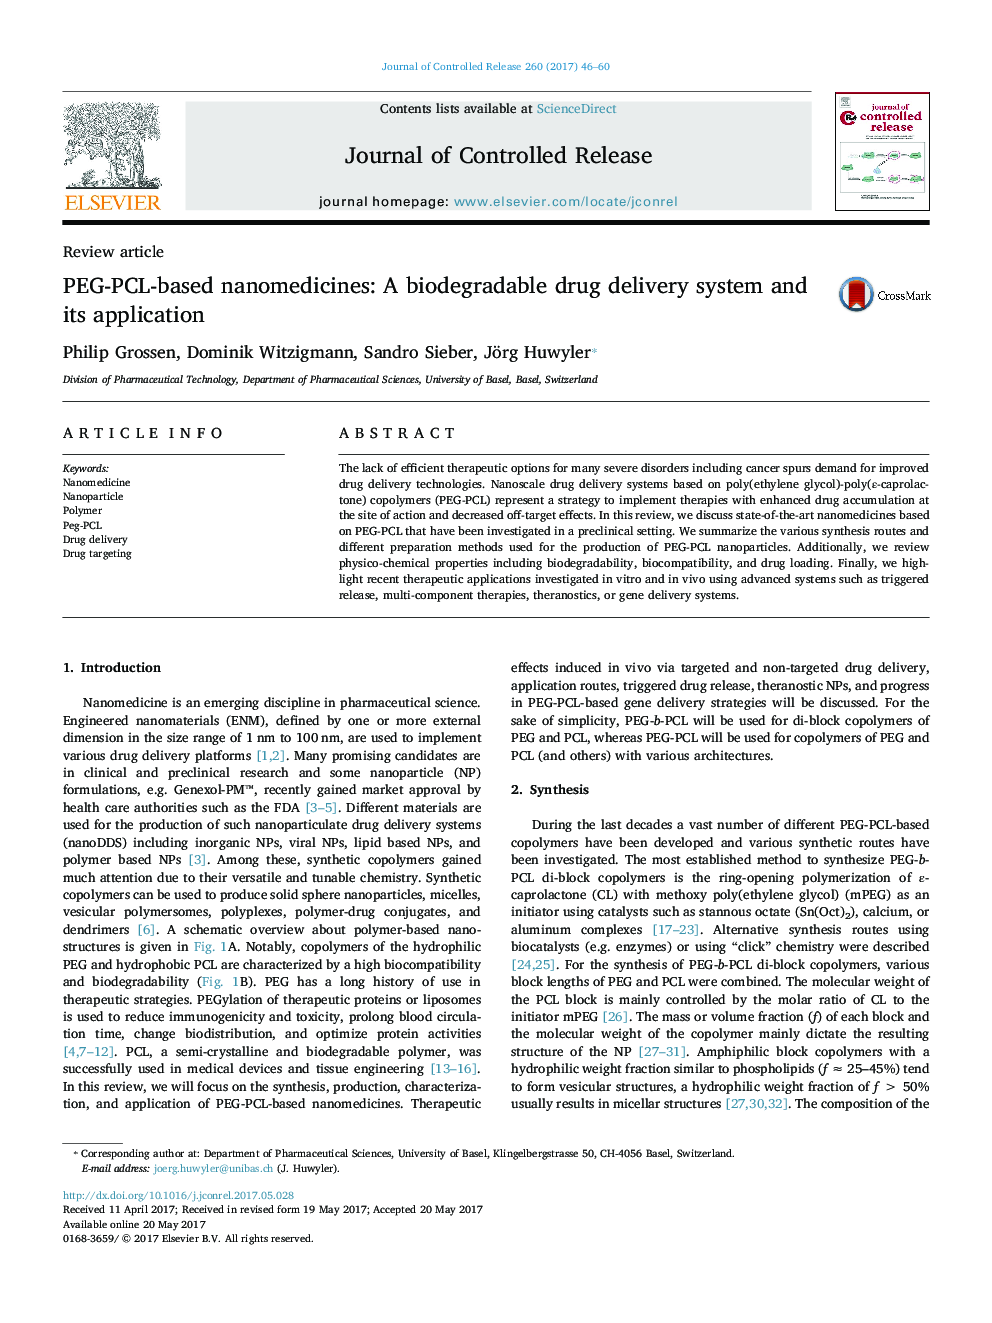 PEG-PCL-based nanomedicines: A biodegradable drug delivery system and its application